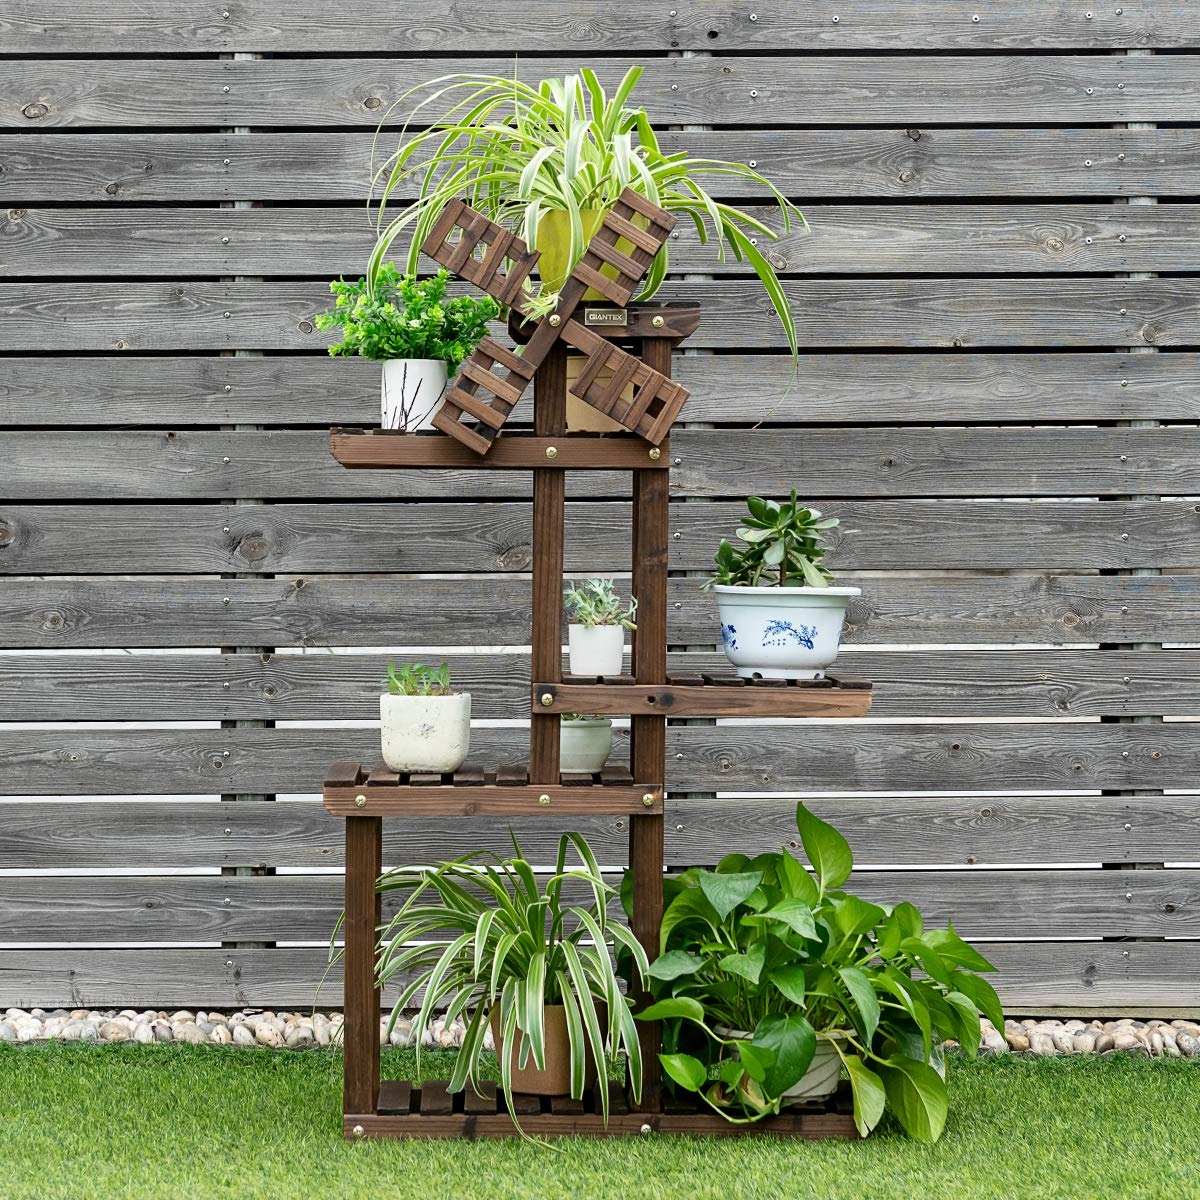 Giantex Wood Plant Stand with Windmill, 5 Tier Multiple Flower Pot Holder Display Shelf for Home Patio Garden Living Room